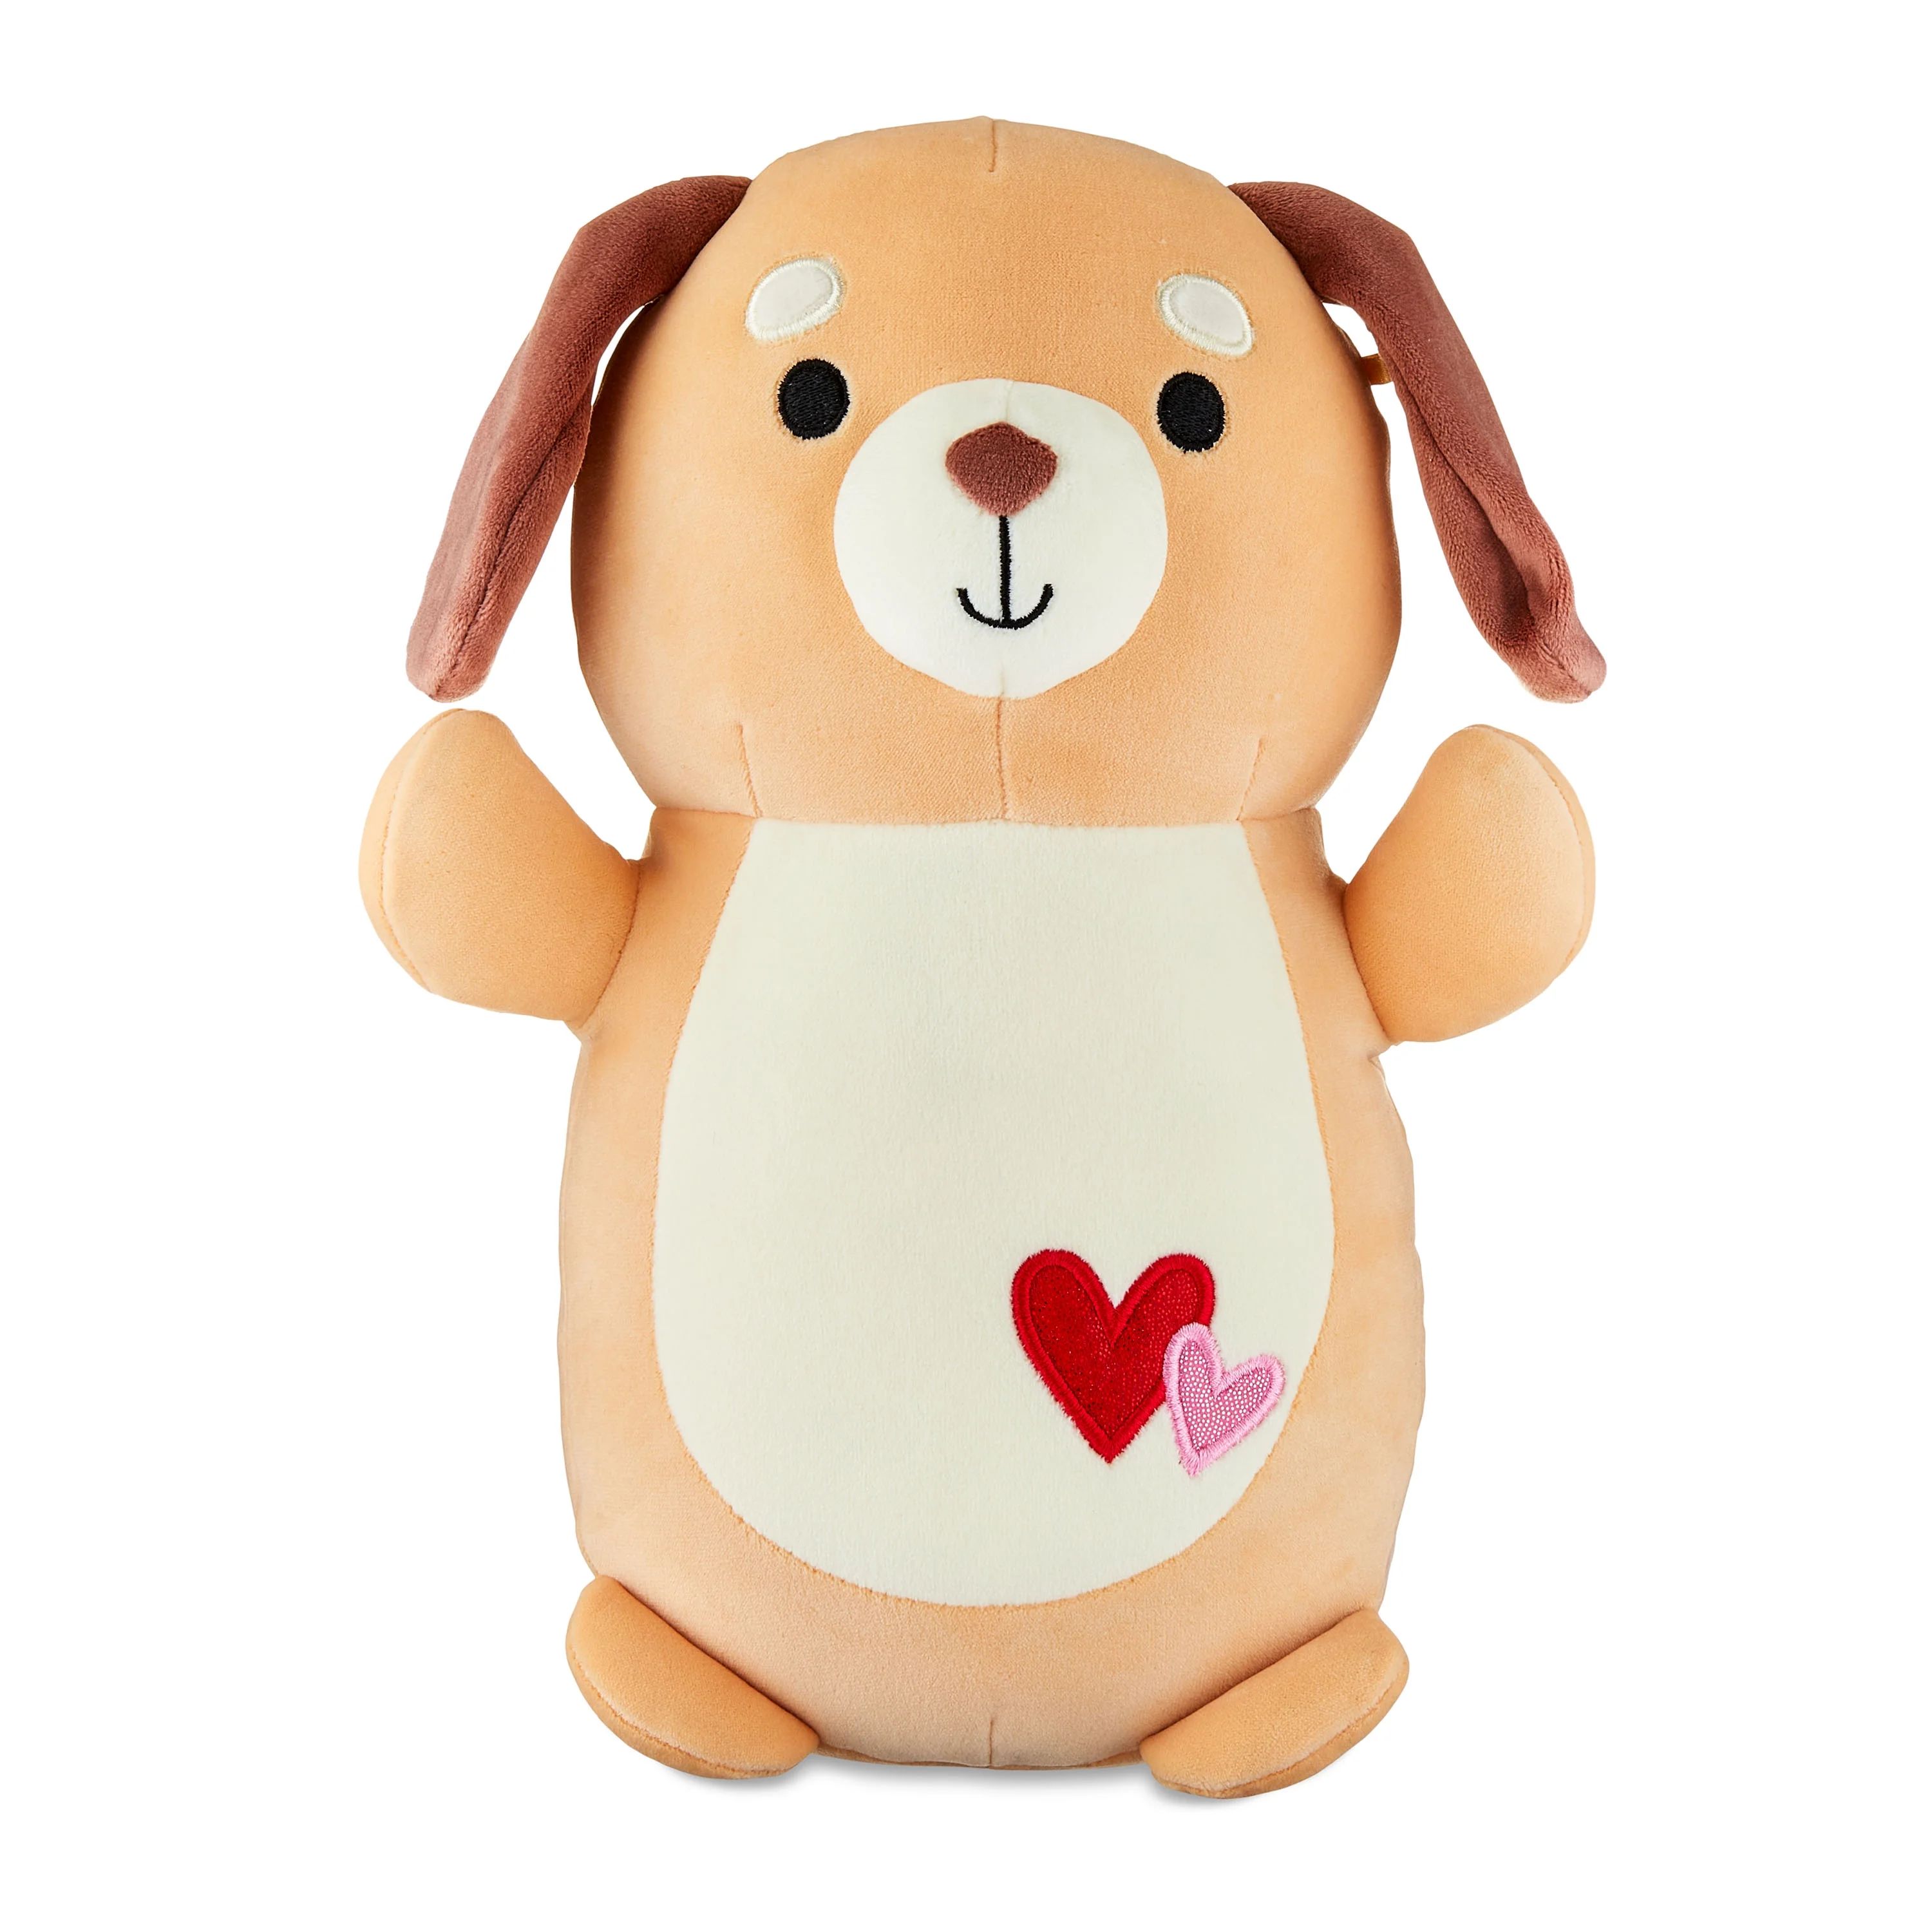 Squishmallows Official Hugmee Plush 10 inch Brown Dog - Child's Ultra Soft Stuffed Plush Toy | Walmart (US)